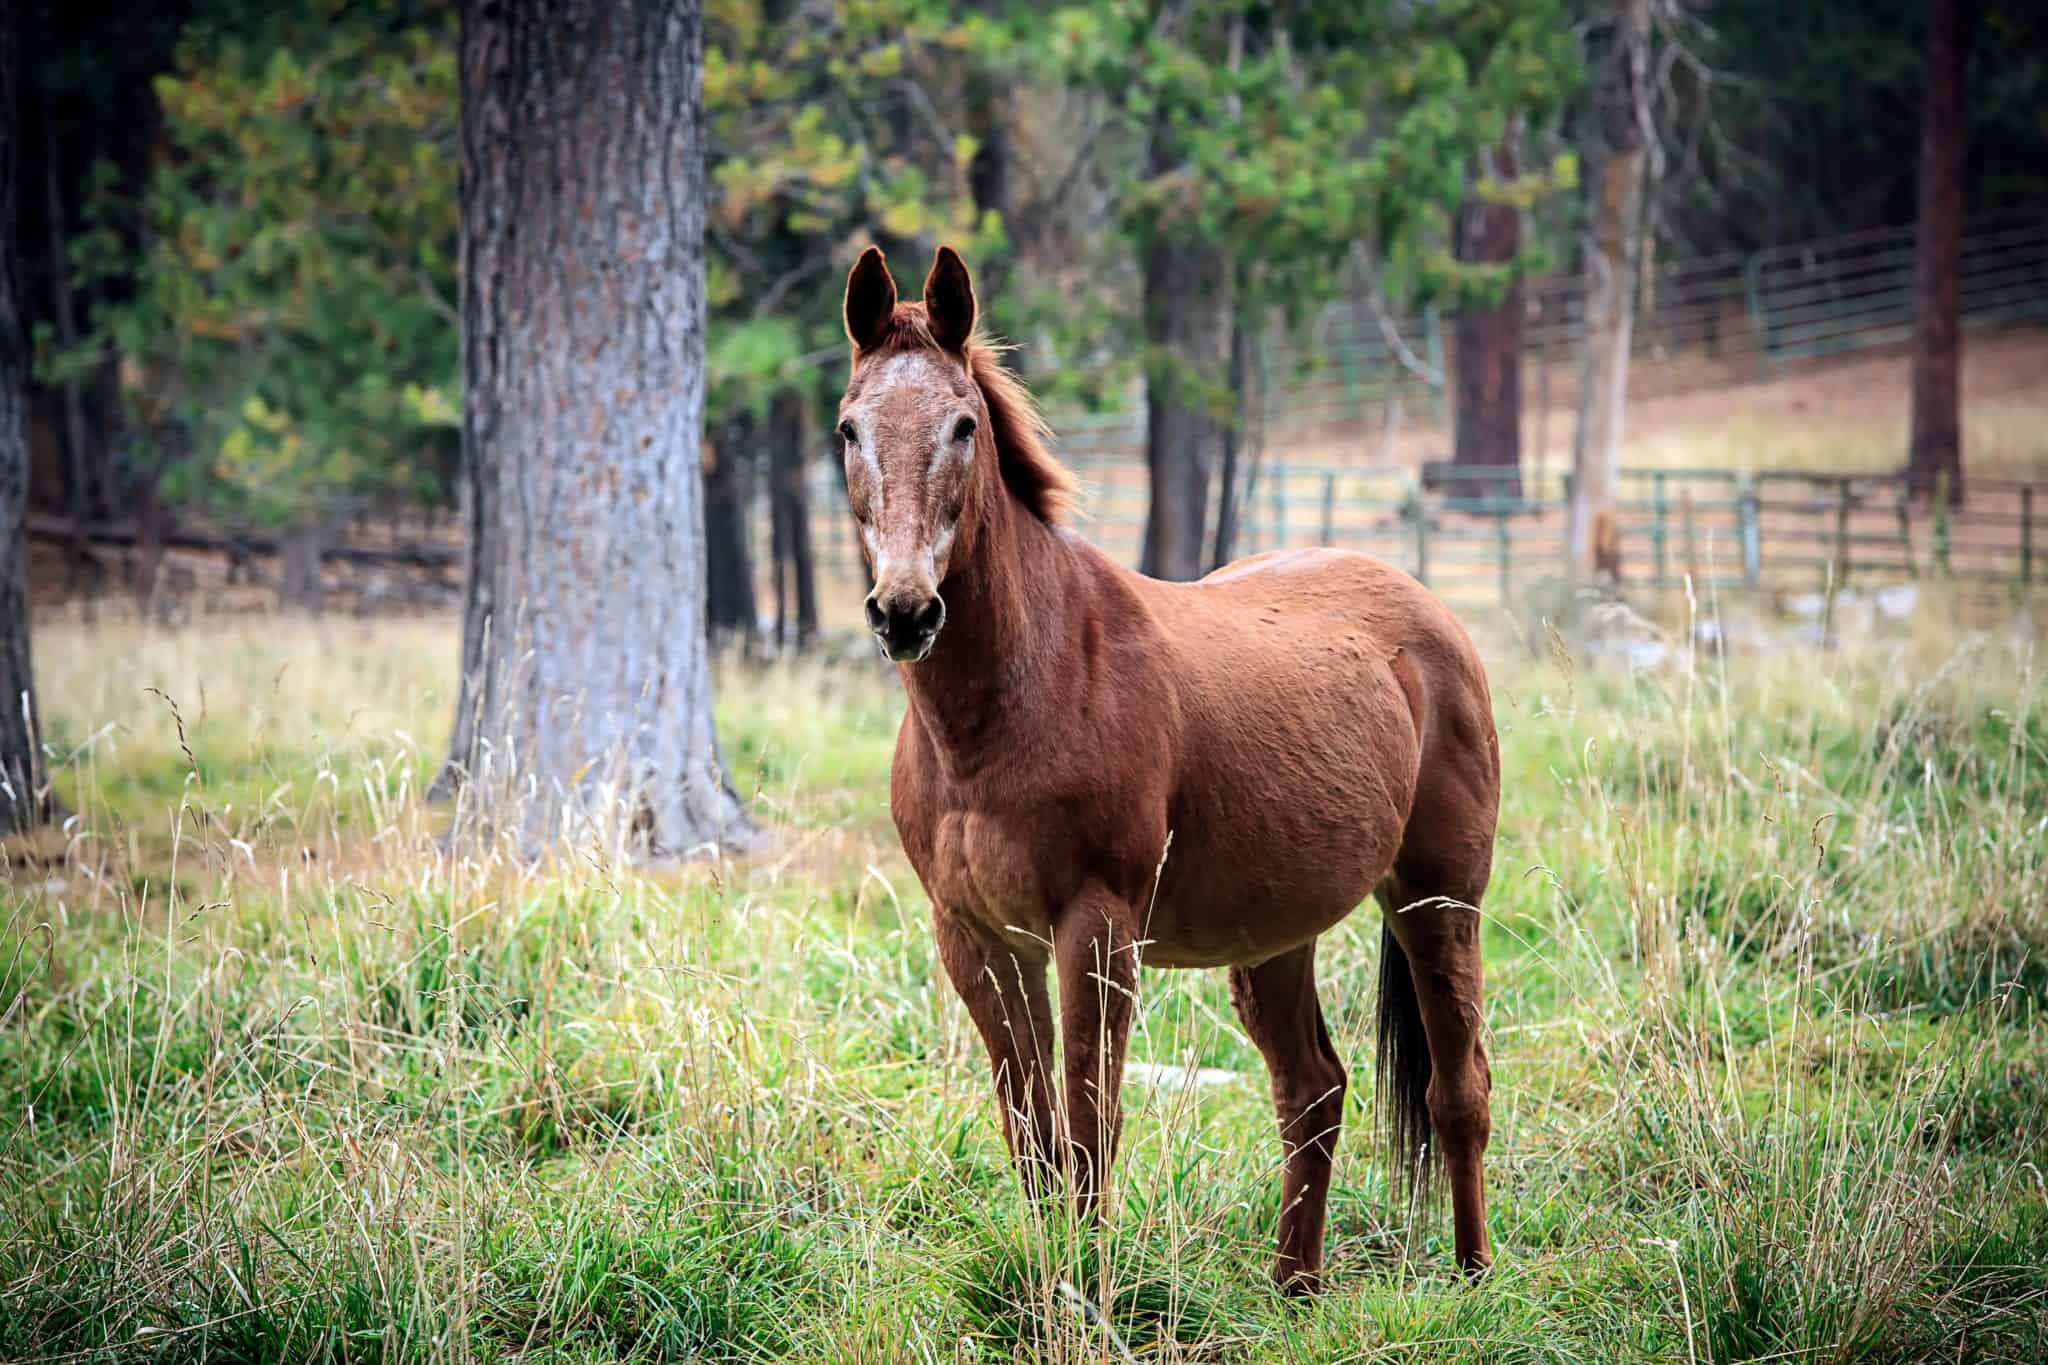 A chestnut colored horse stands in a grassy field in north Idaho.